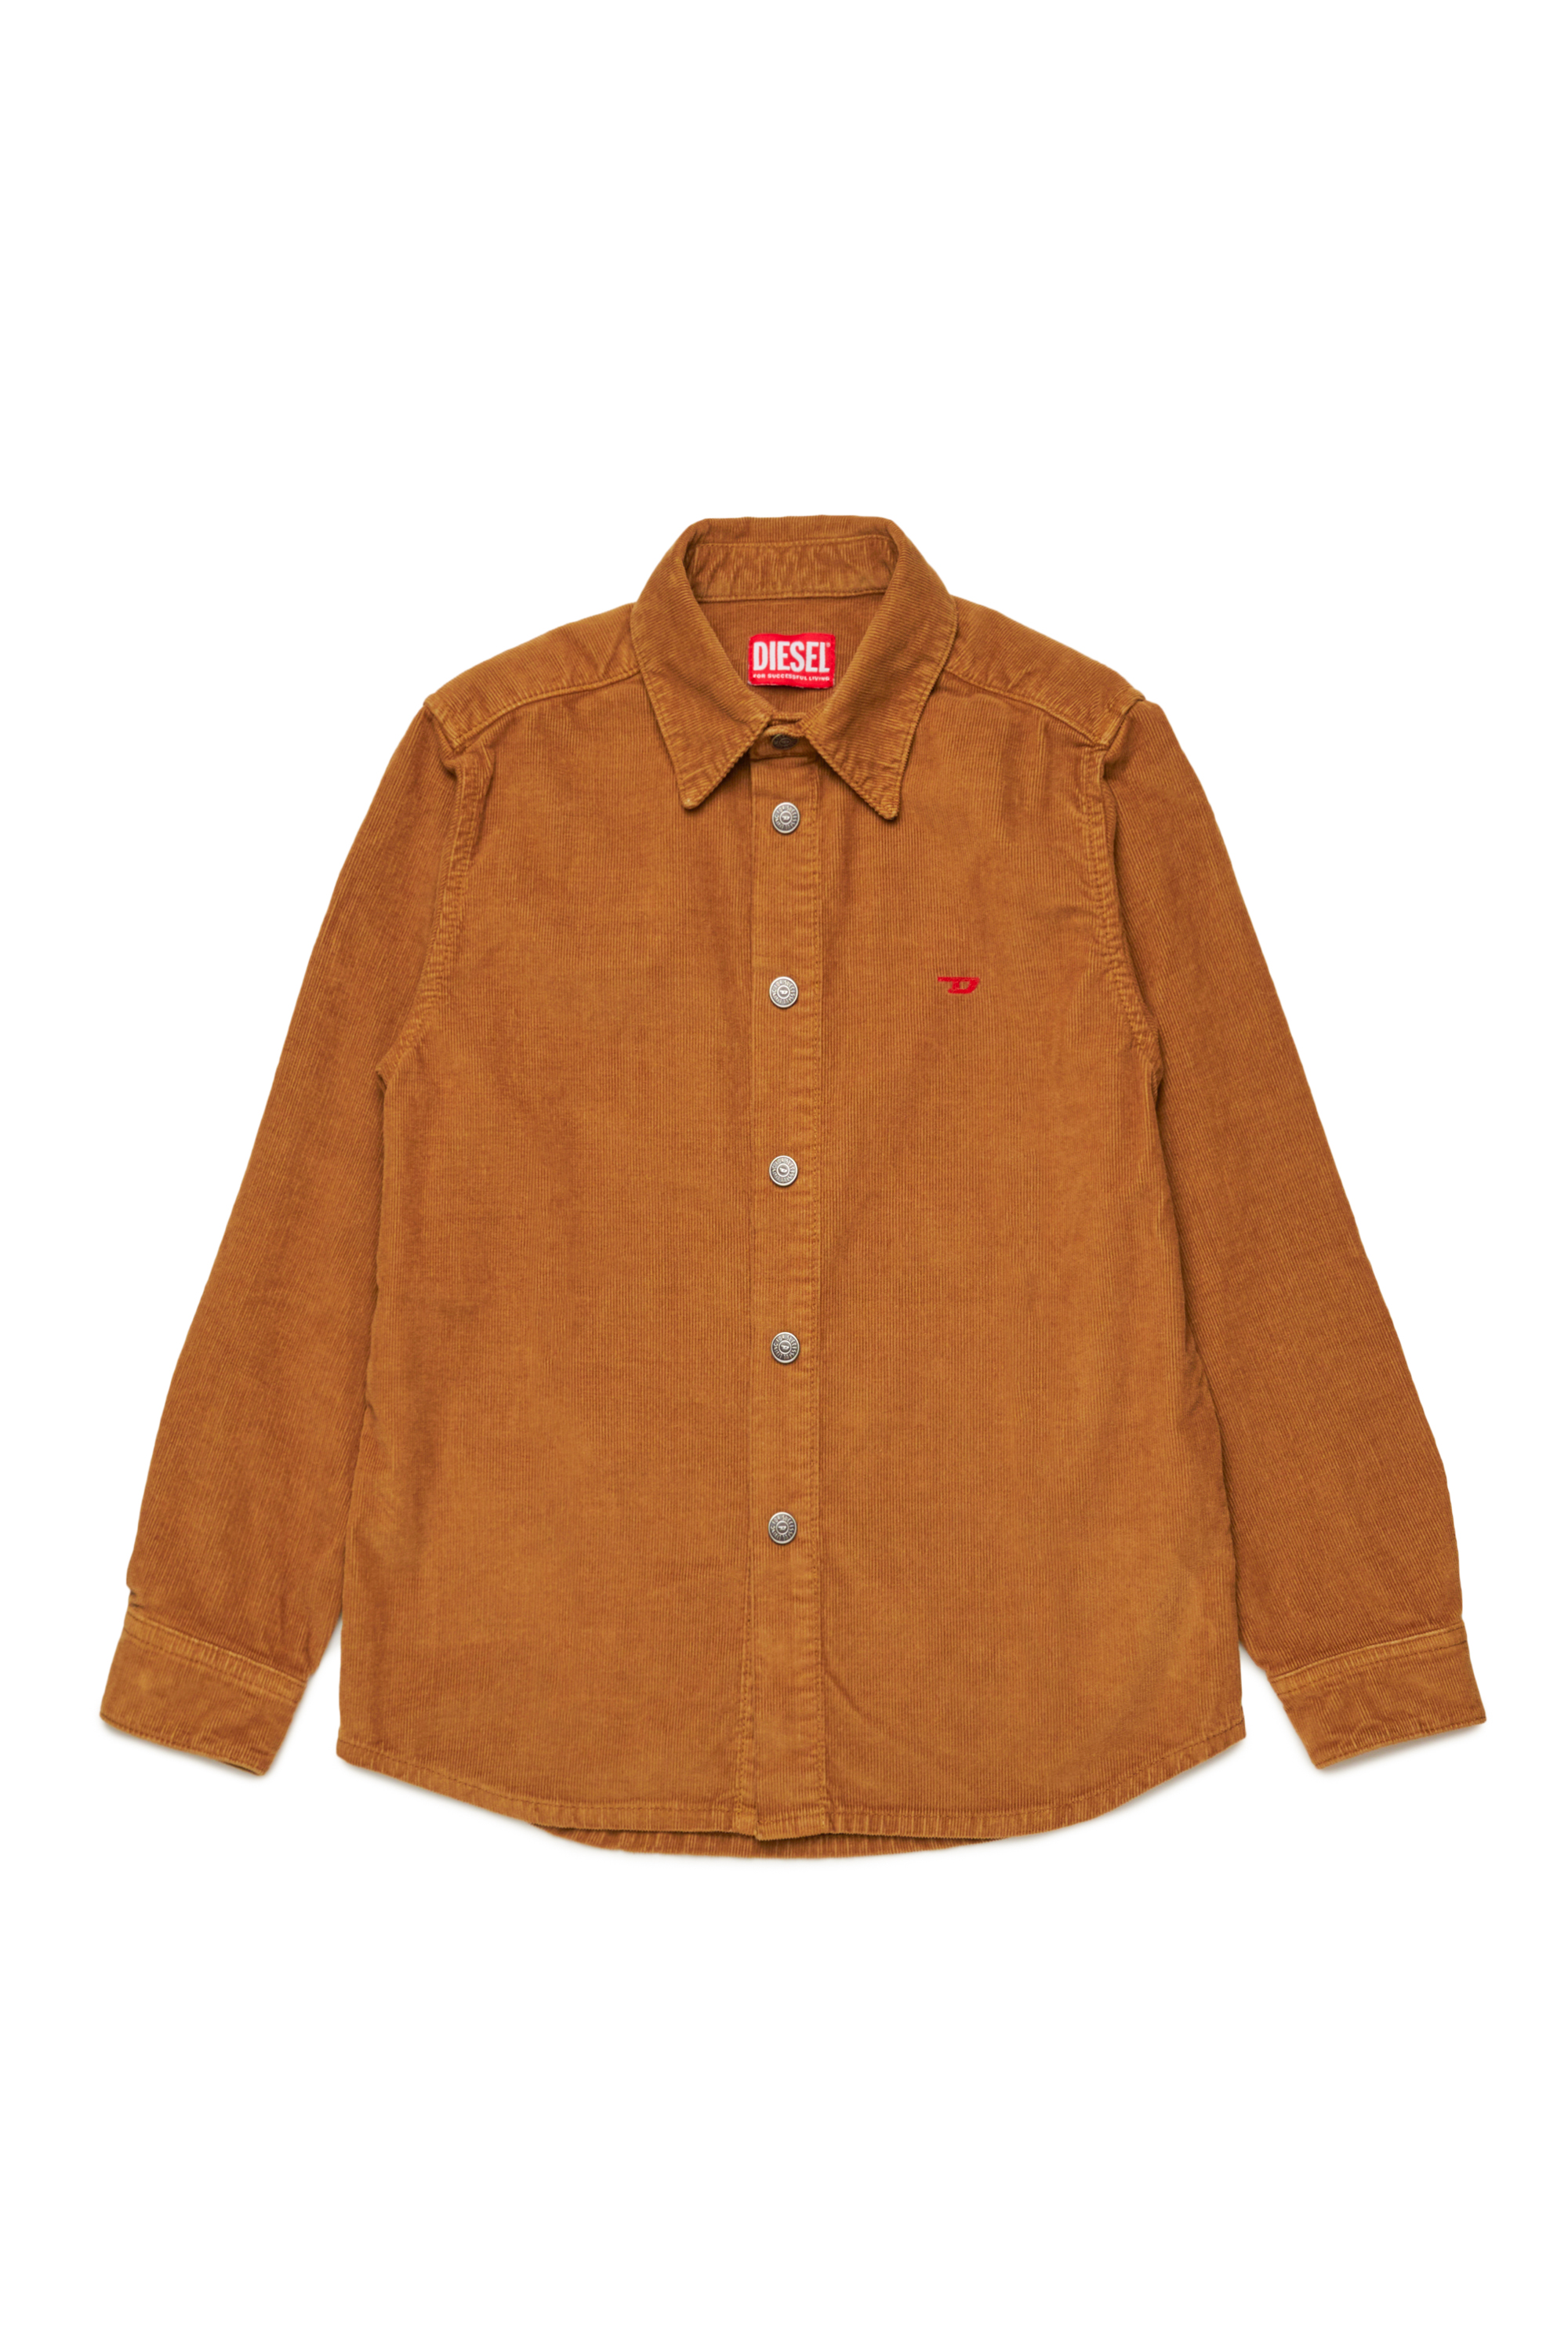 Diesel - CSIMPLY-OVER, Man Corduroy shirt with small D logo in Brown - Image 1